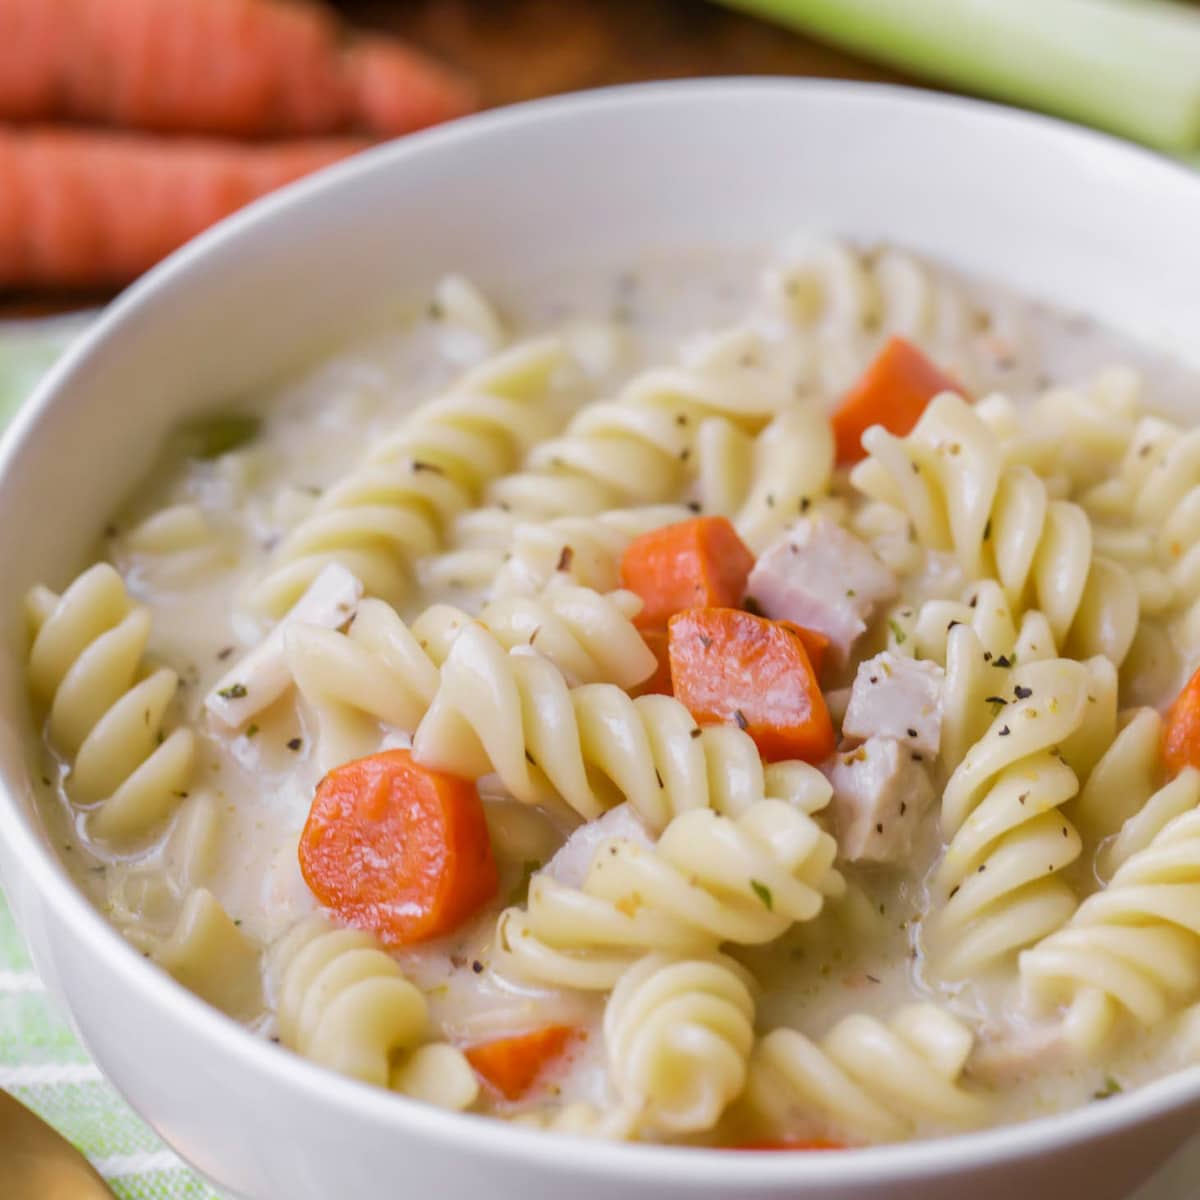 Easy soup recipes - Turkey noodle soup served in a white bowl.